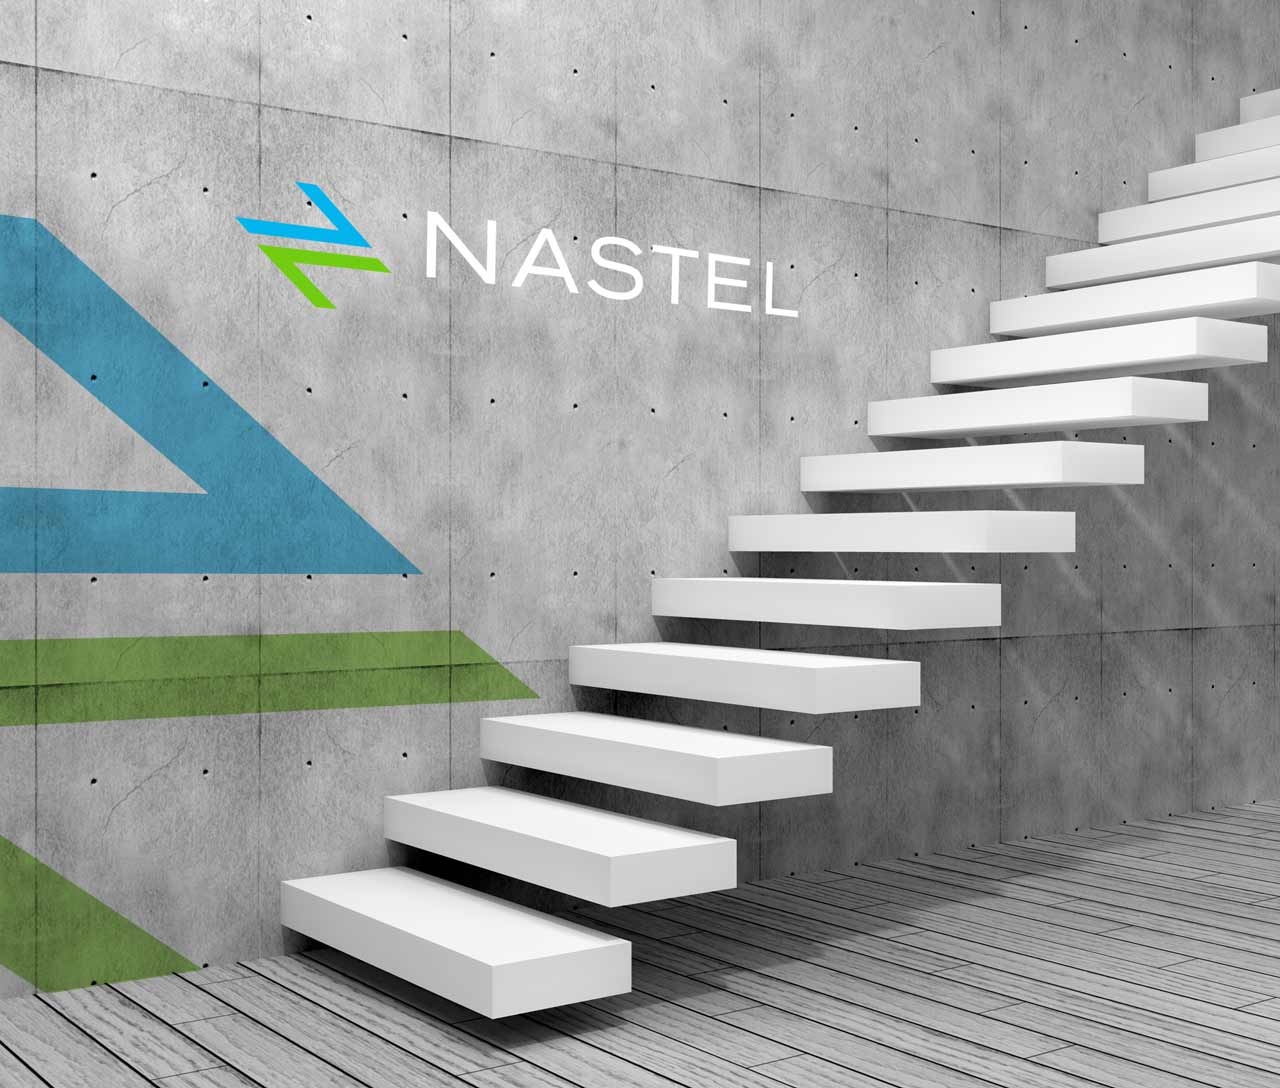 futuristic office interior with nastel logo on wall and super graphic next to floating stairs